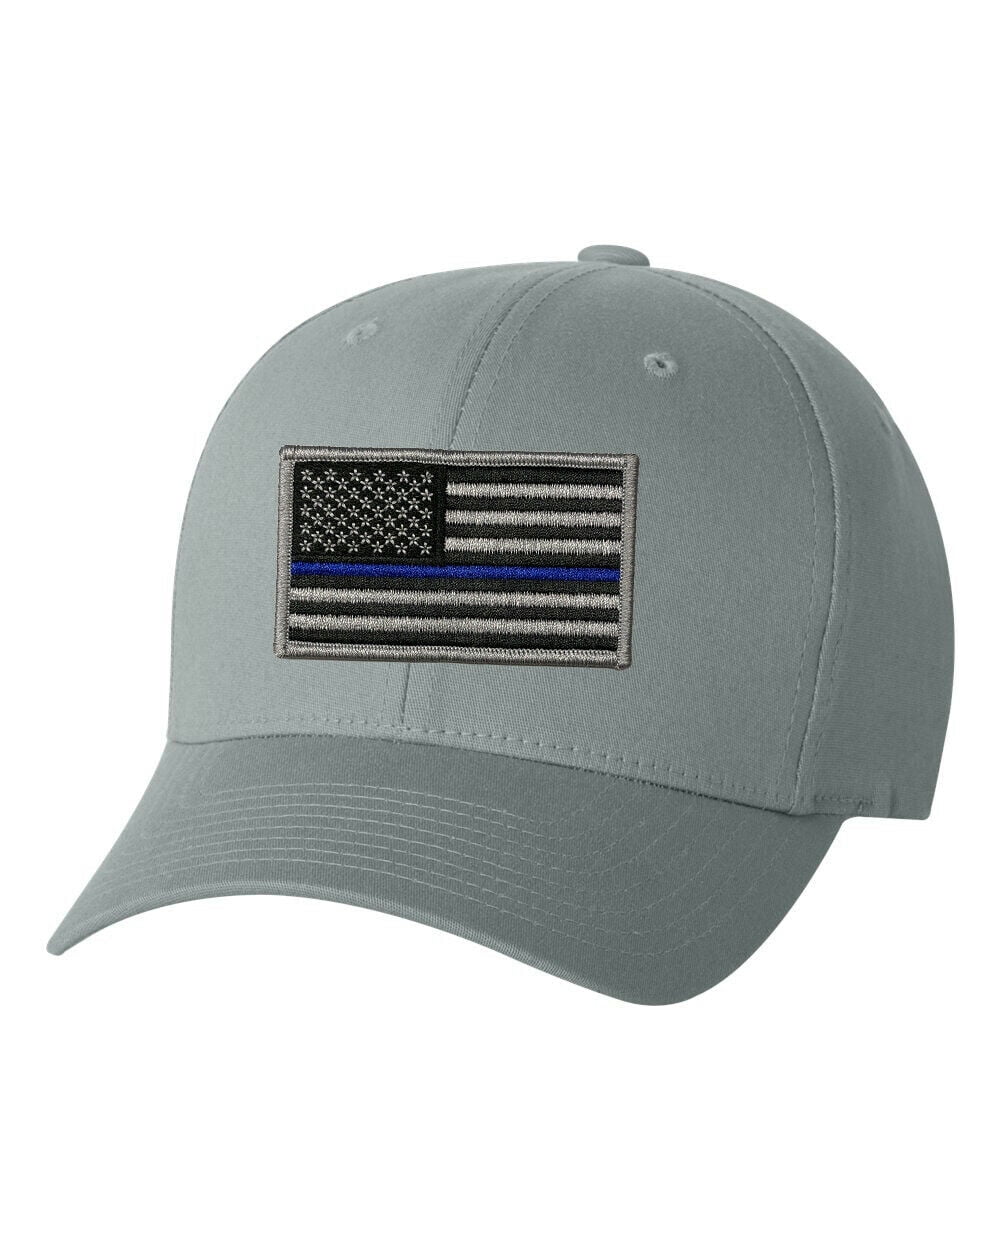 Hat Fitted V-Flex Baseball Flag with Patch Cap Flexfit Line Thin Twill Blue